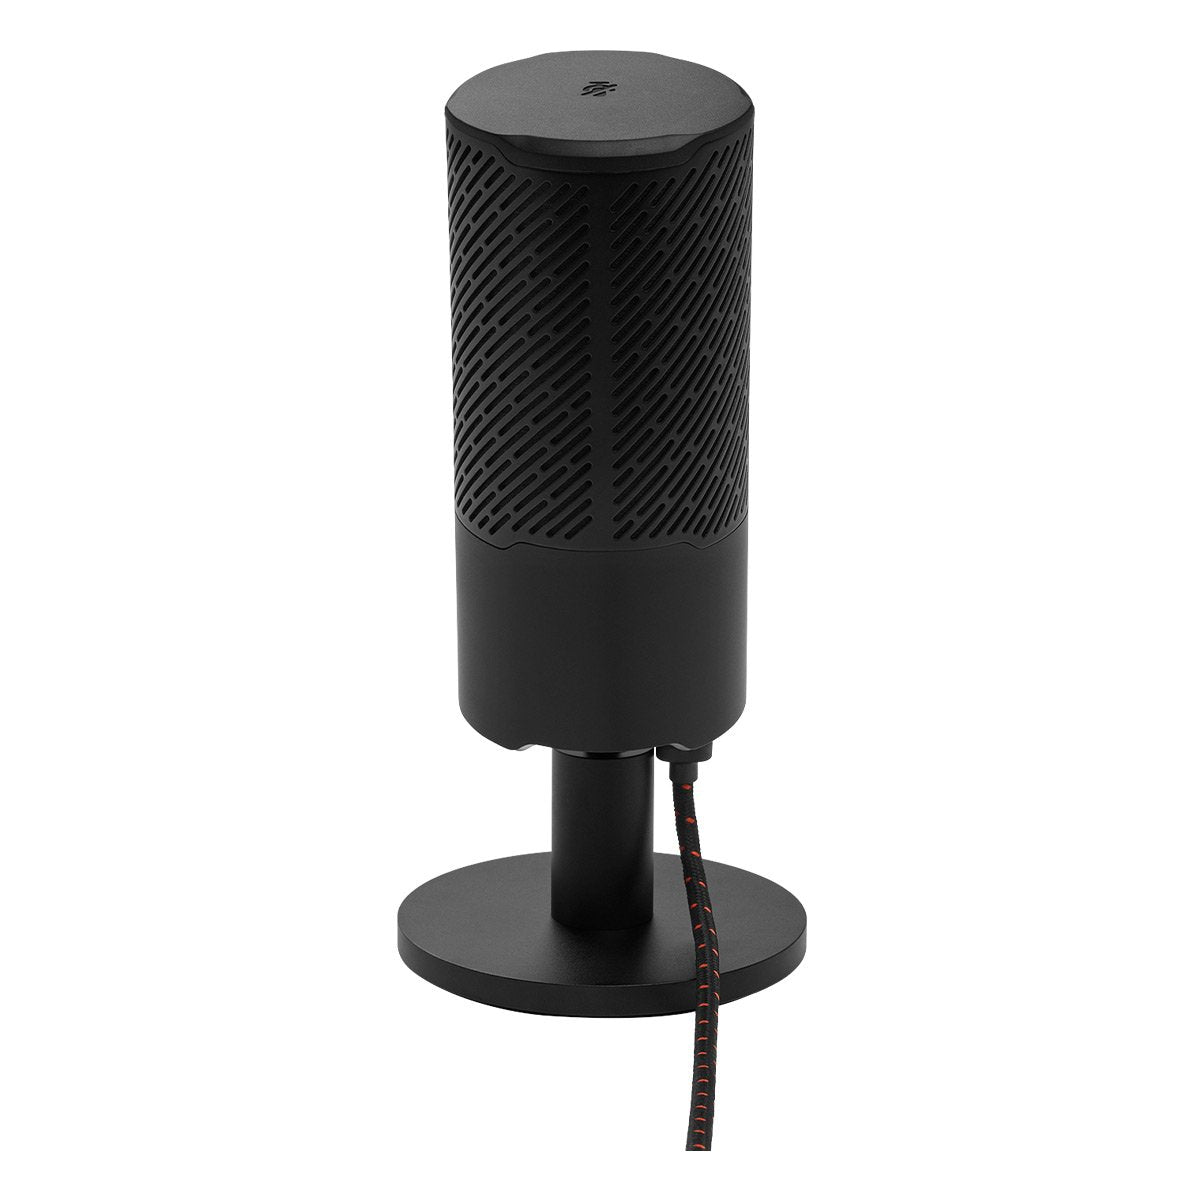 Stream Dual-Pattern USB Microphone for Streaming, Recording, and Gaming